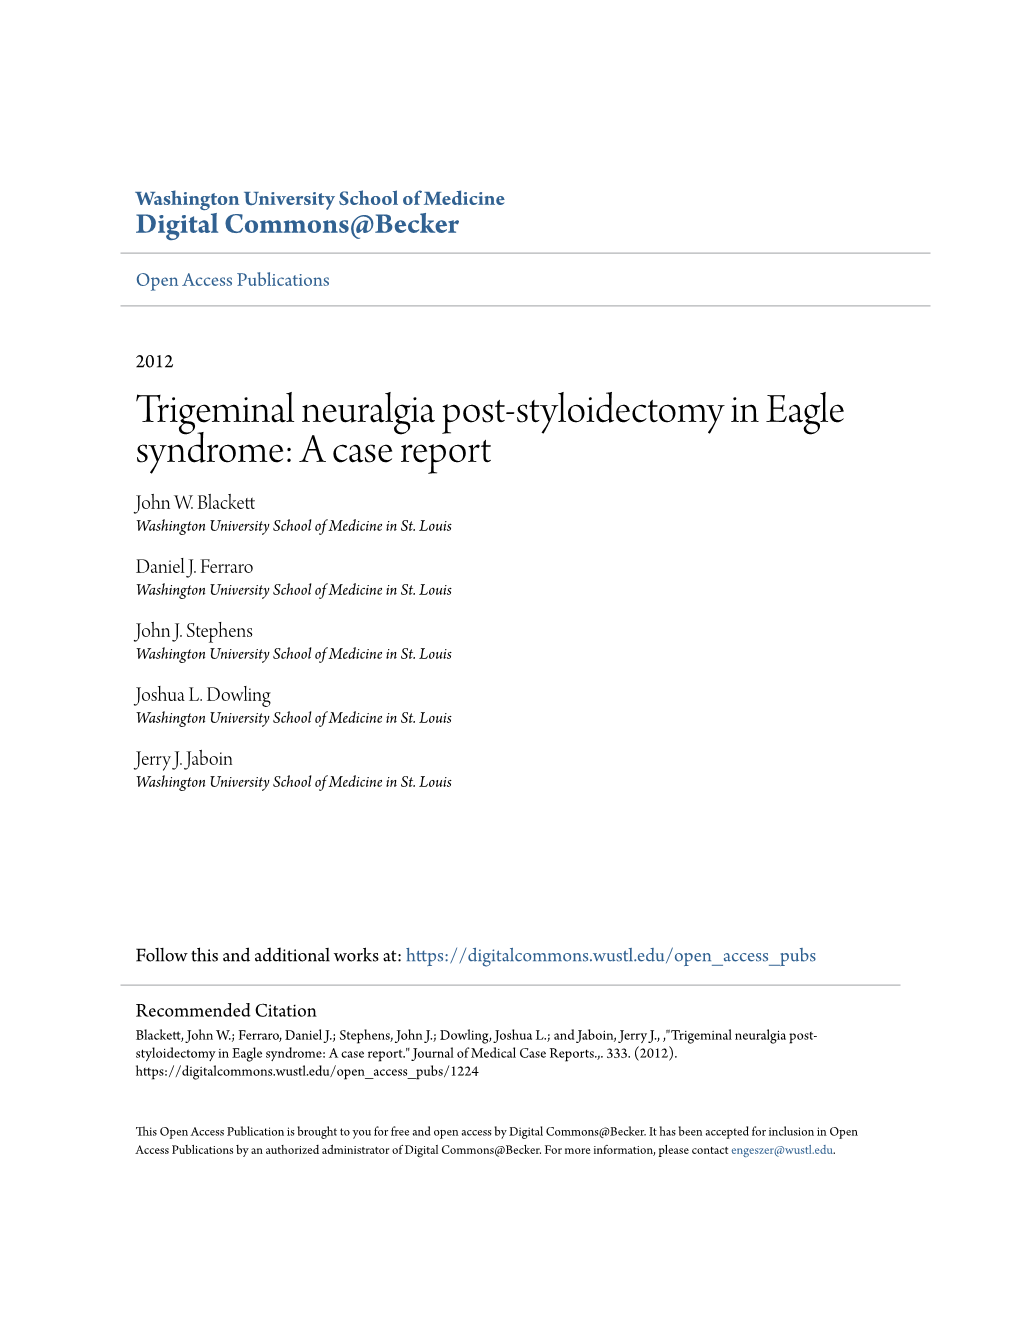 Trigeminal Neuralgia Post-Styloidectomy in Eagle Syndrome: a Case Report John W